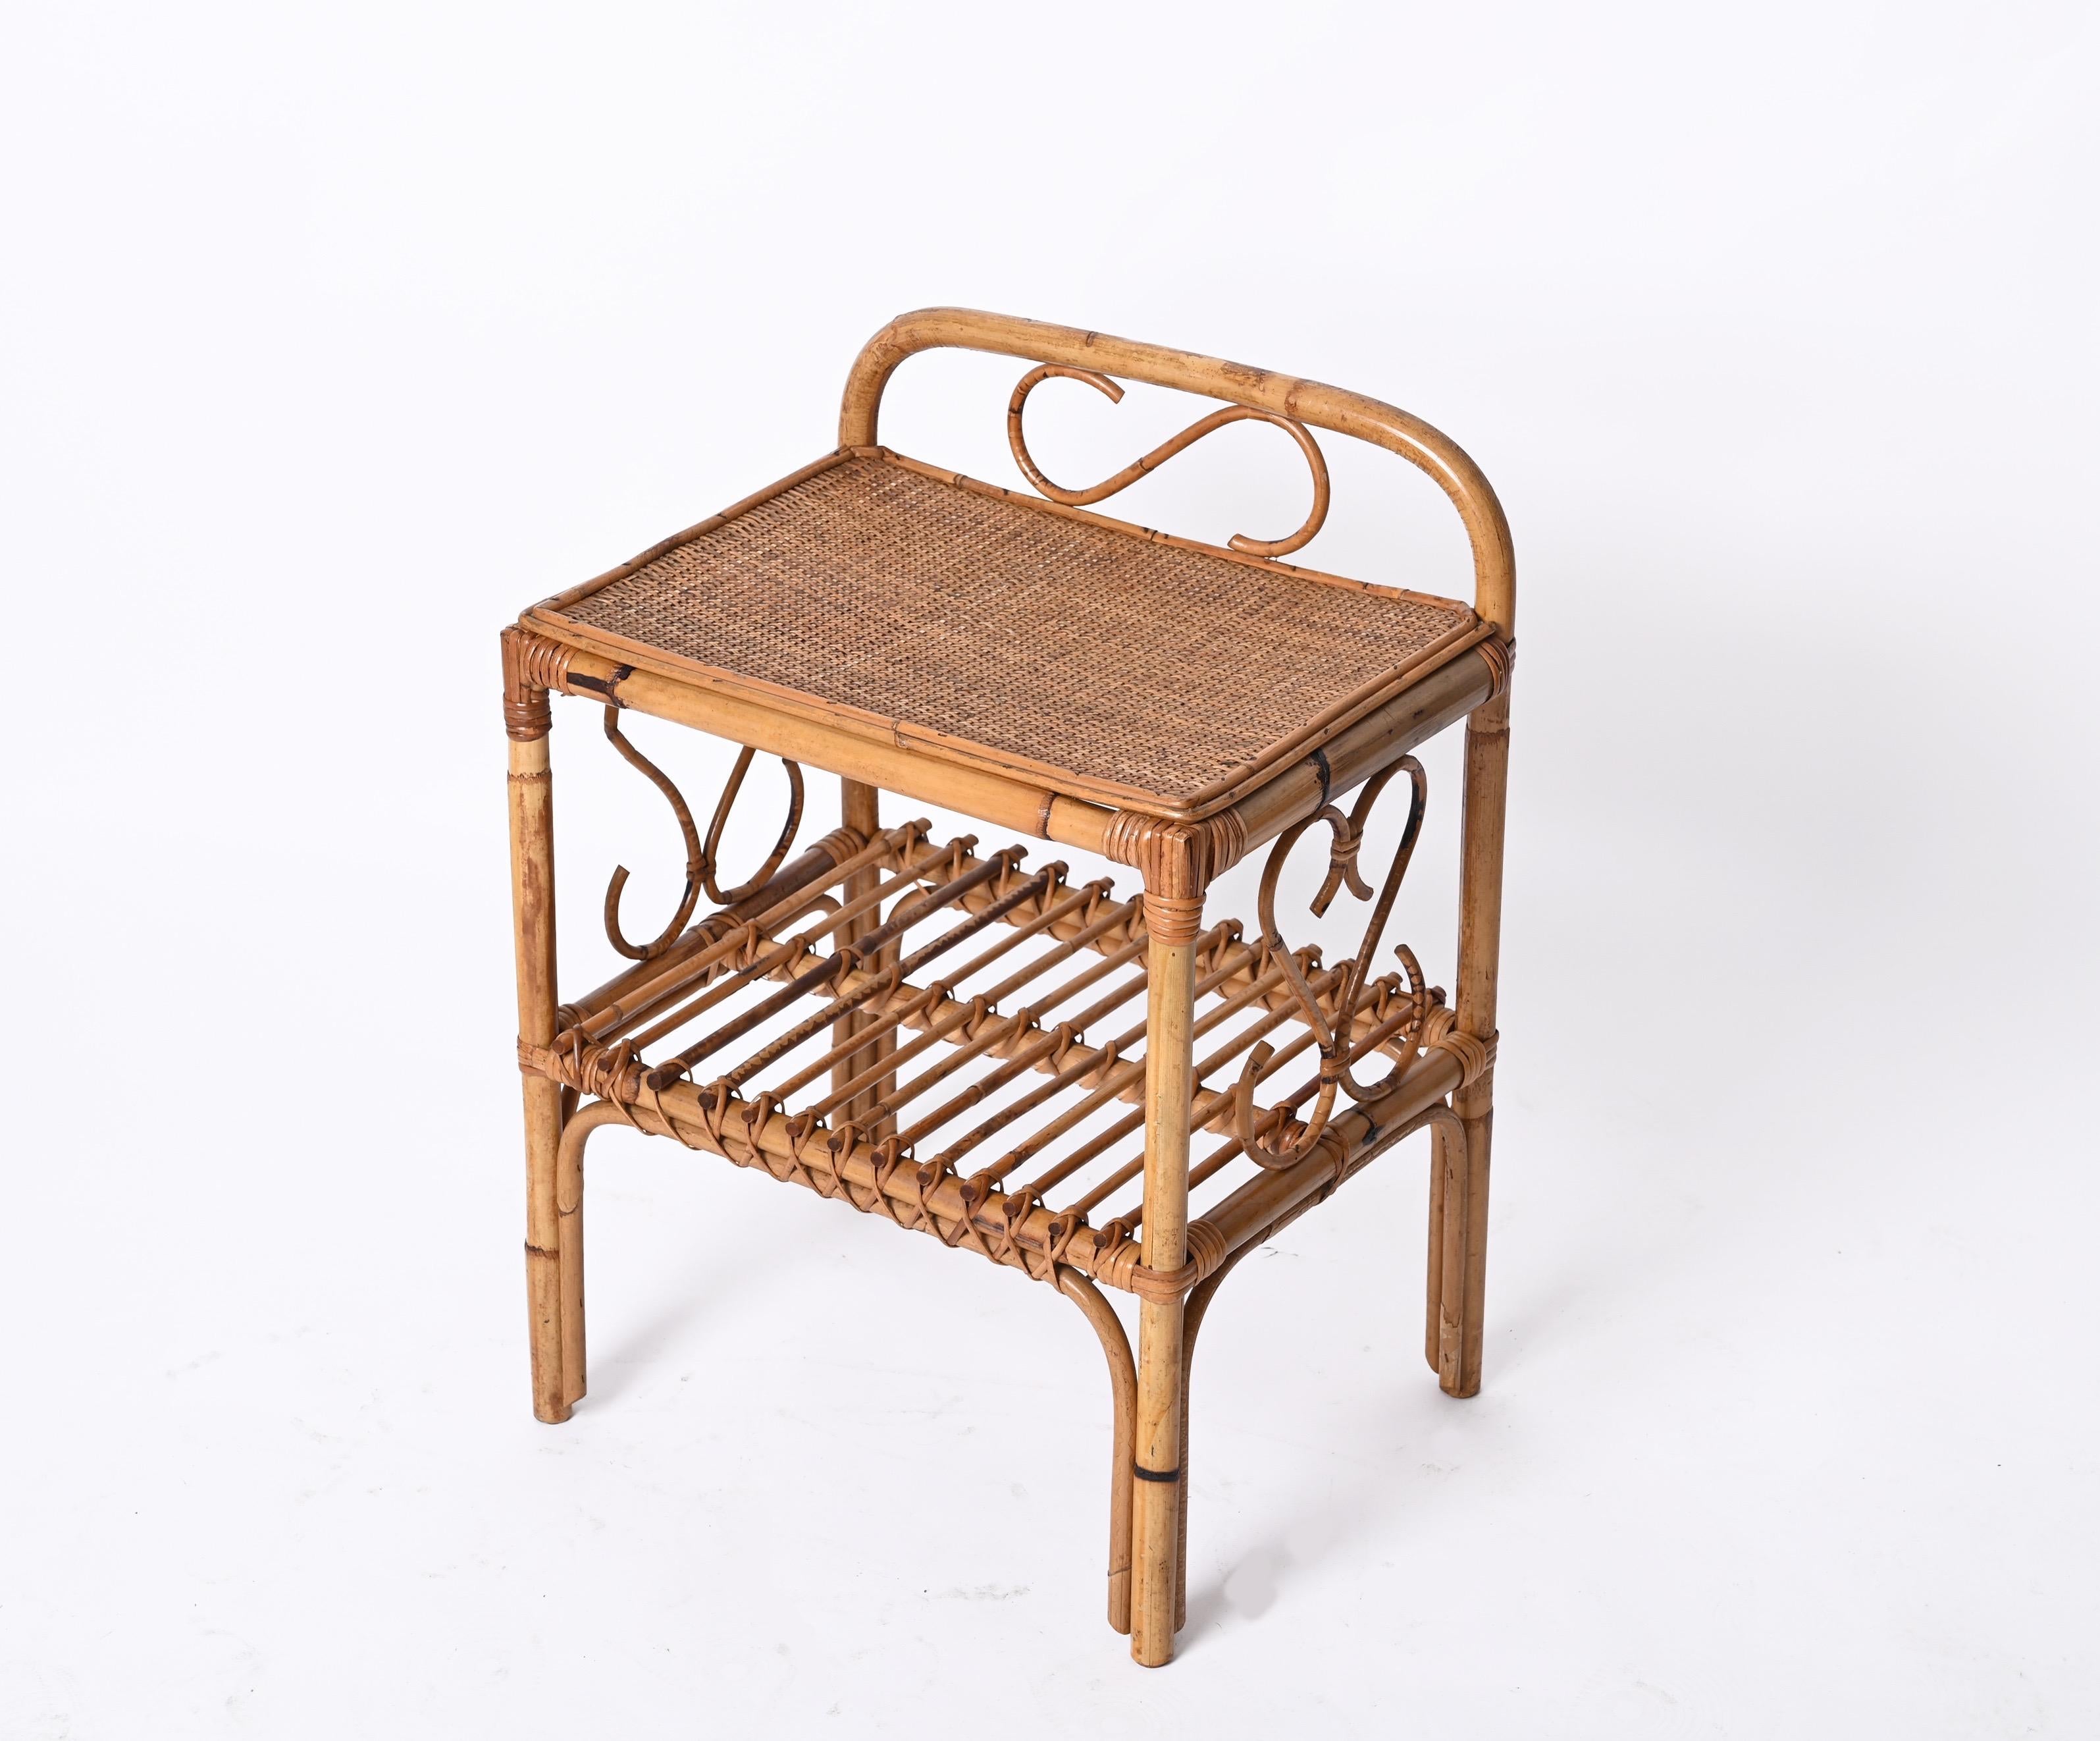 Amazing Pair of Mid-Century Modern Bamboo and Rattan Nightstands, designed in Italy in the 60's and attributed to Franco Albini.

These stunning bedsides  feature a structure made in bamboo with heart-shaped rattan decorations on the sides. 
The top